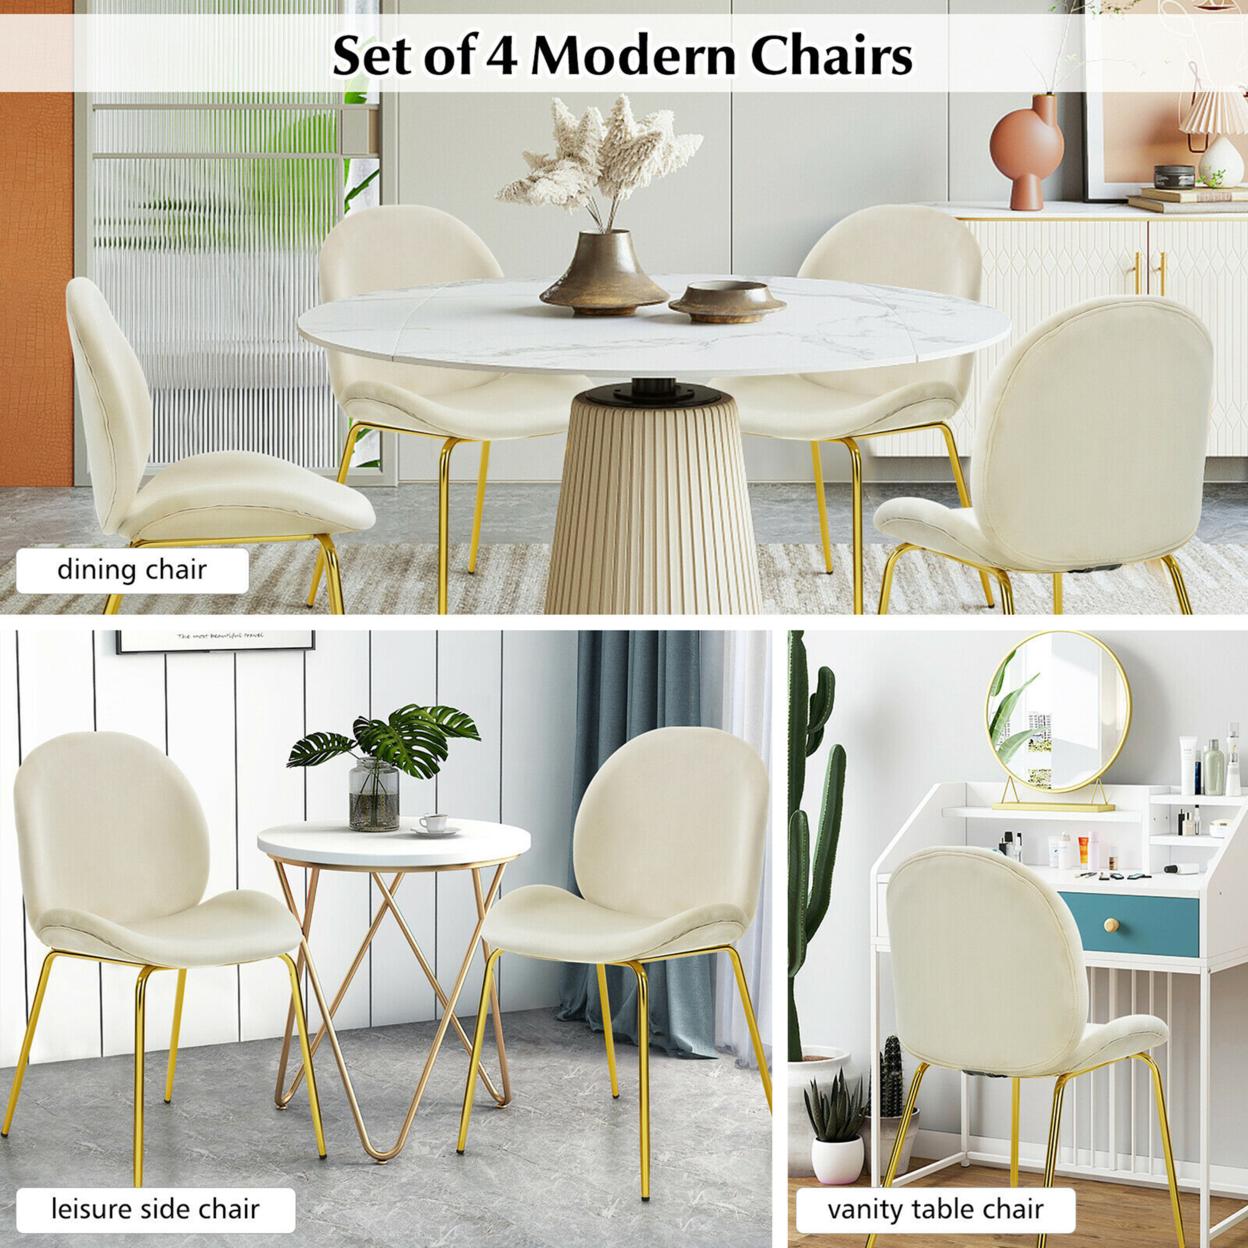 4PCS Velvet Dining Chair Accent Leisure Chair Armless Side Chair - Beige